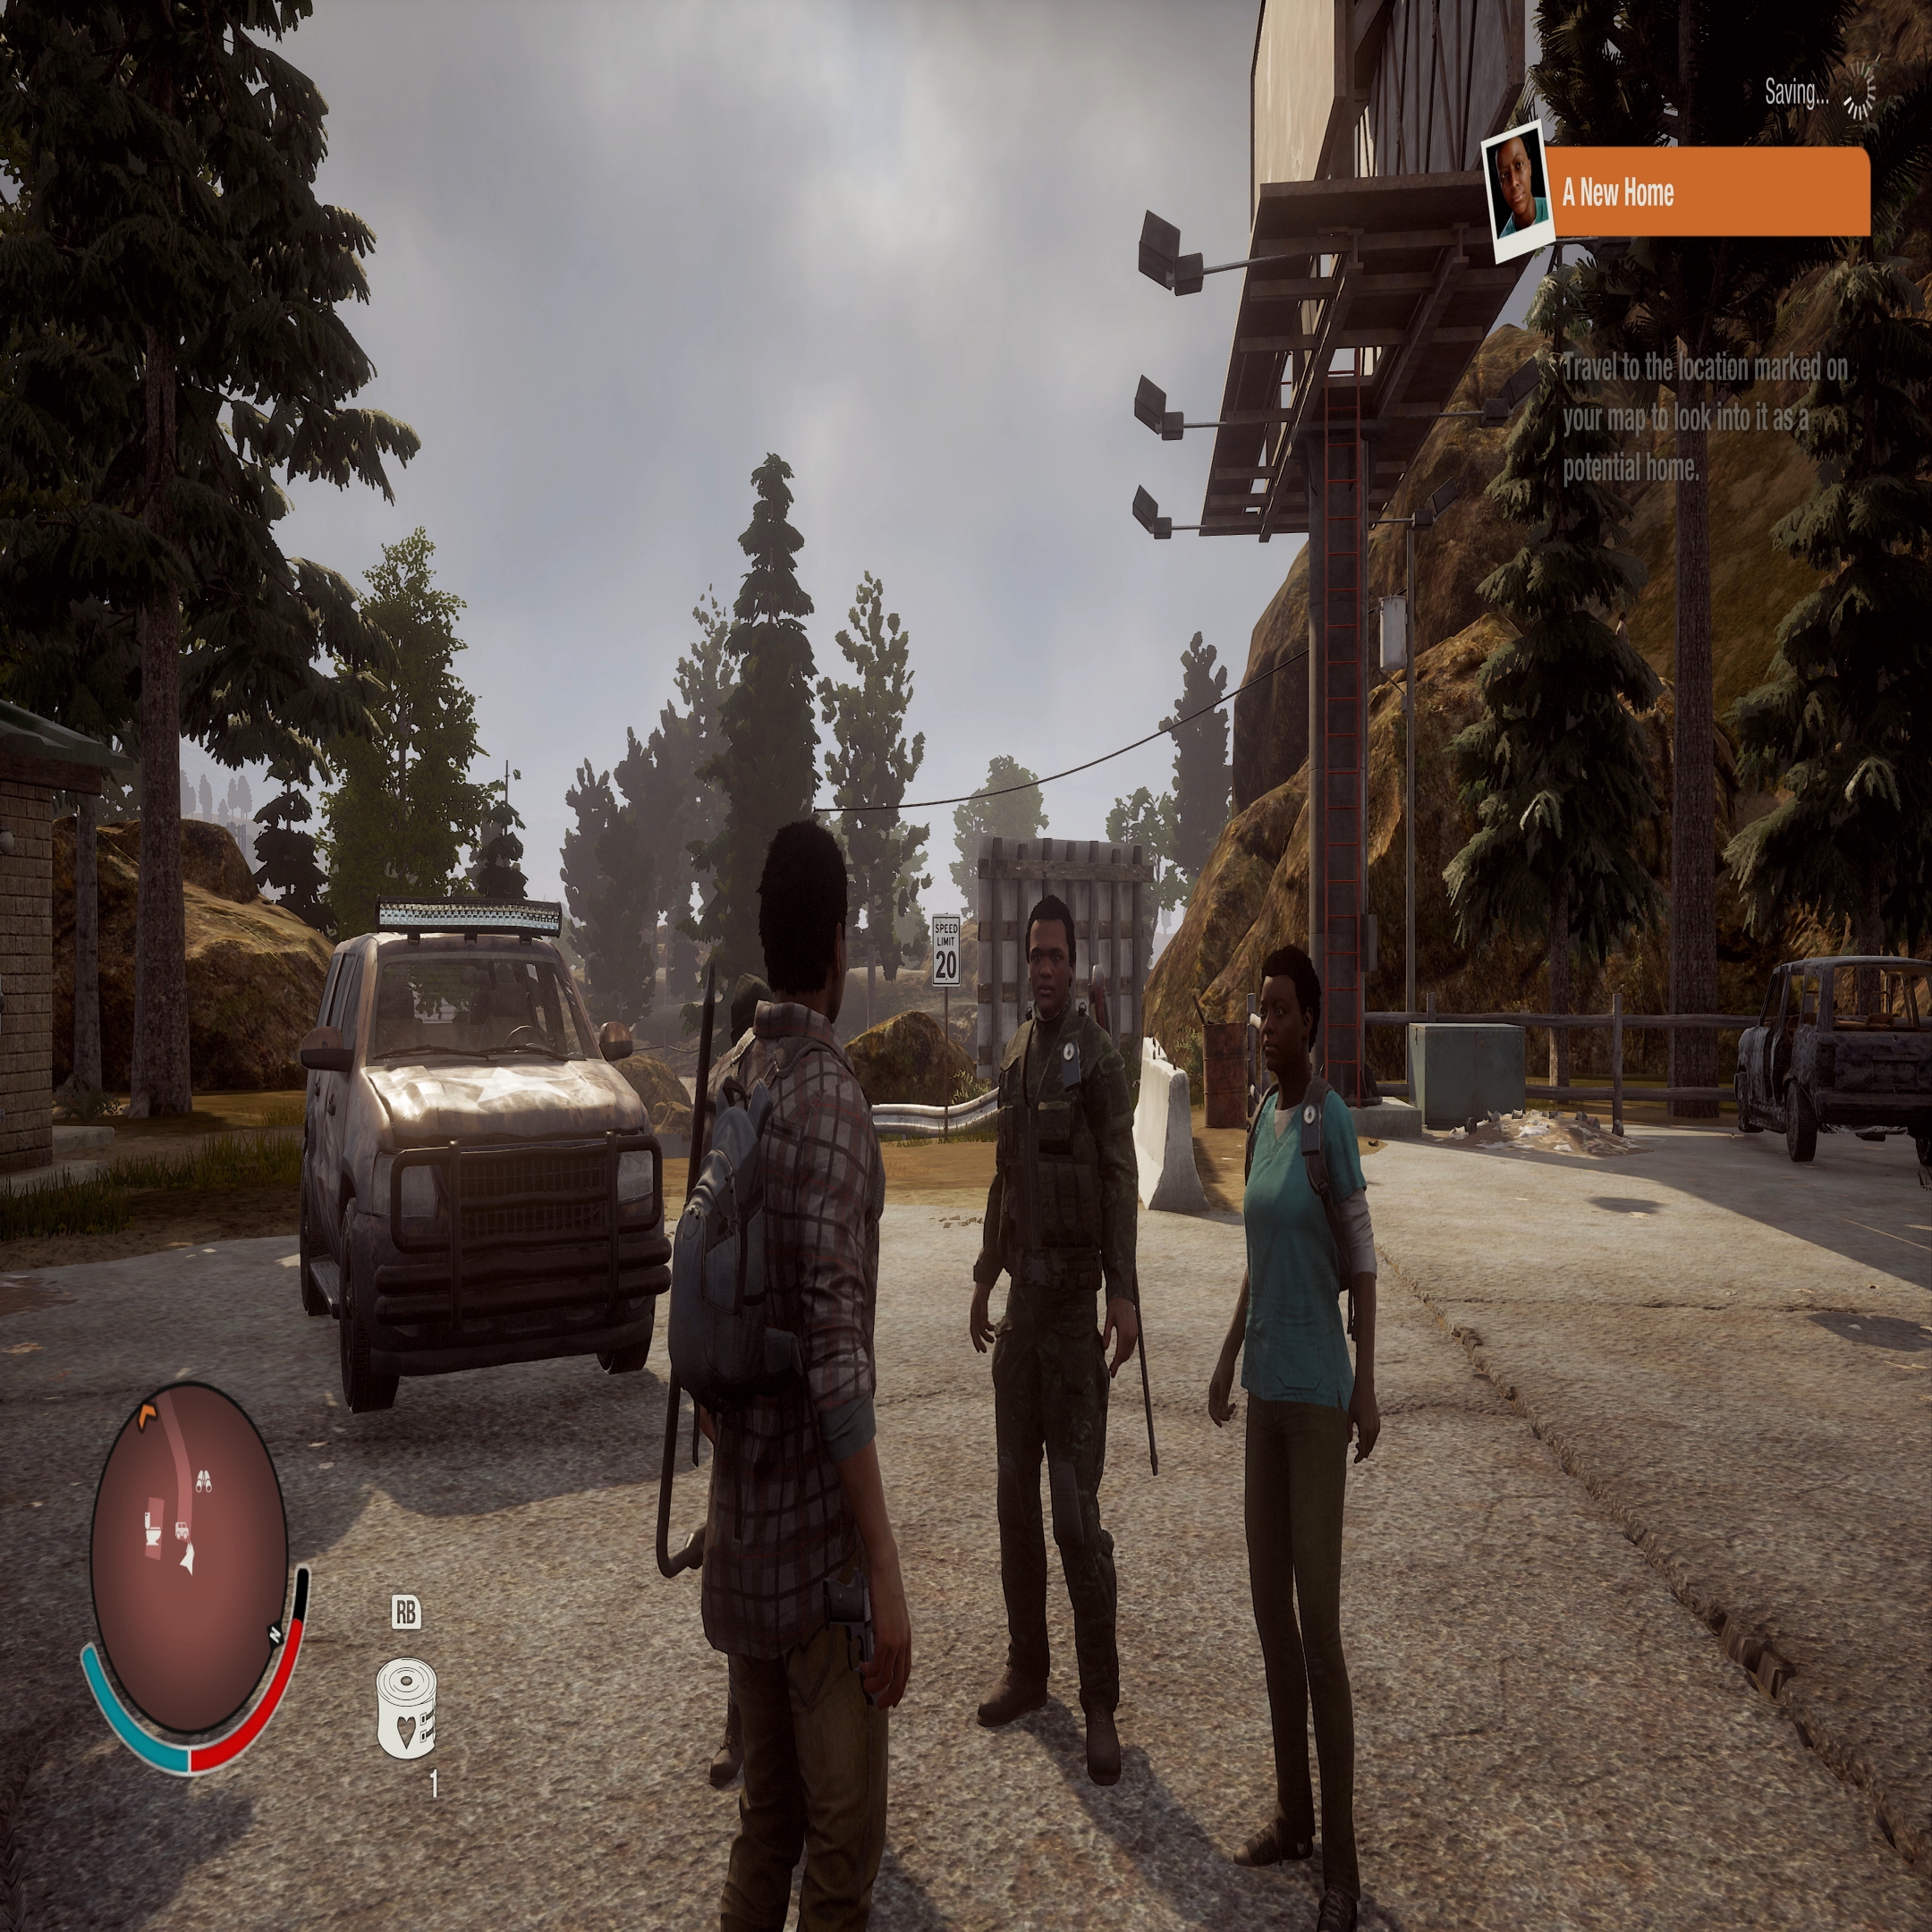 Can I play State of Decay 2 on PC without owning an Xbox? - Quora